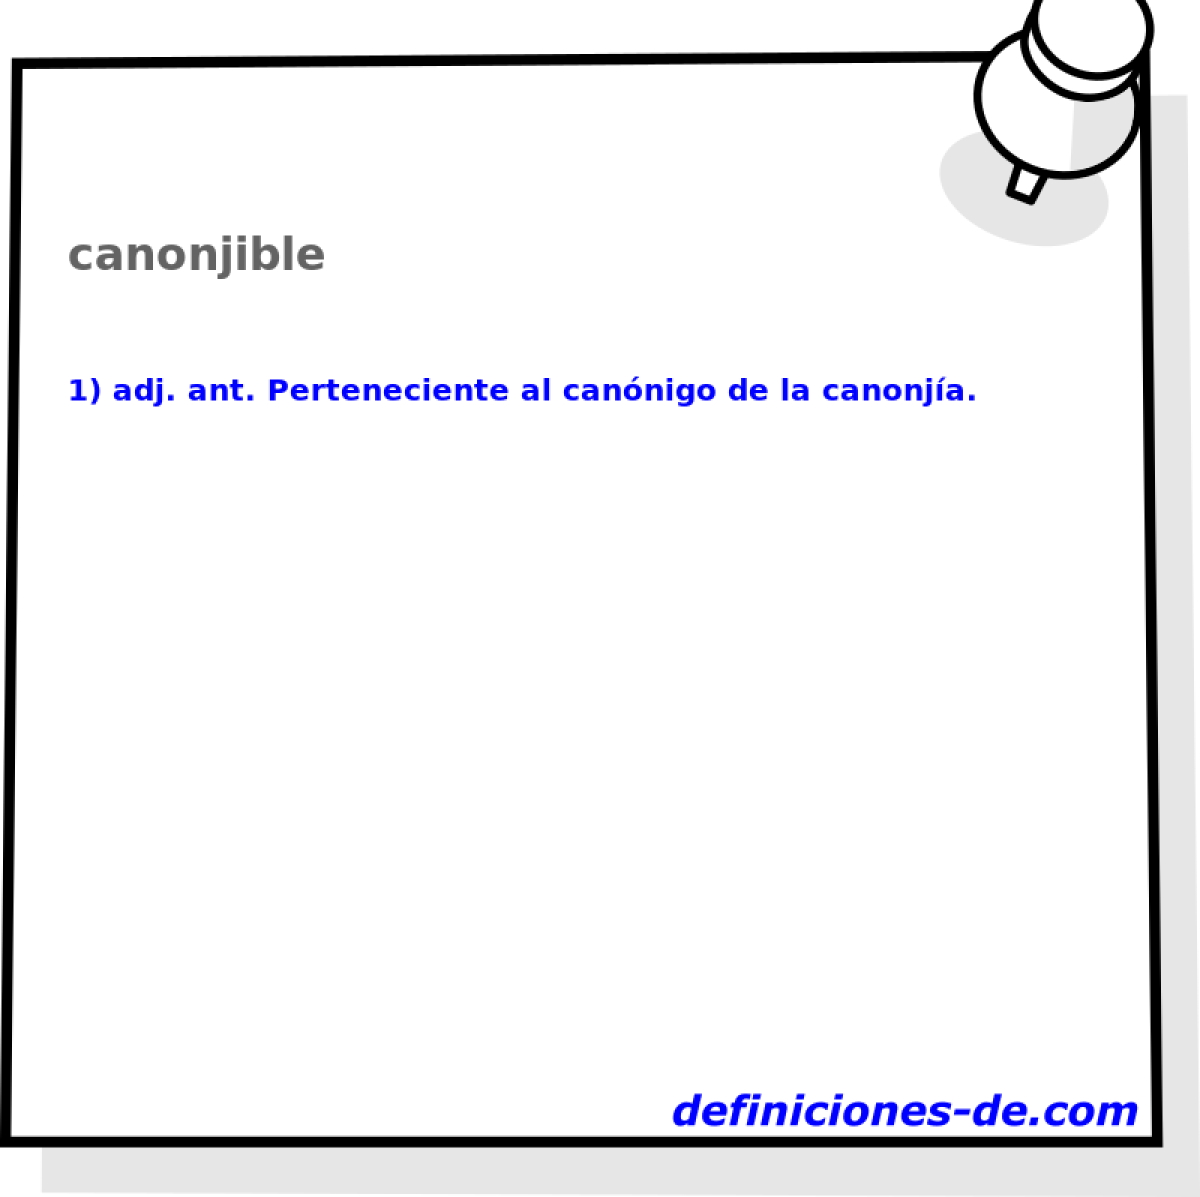 canonjible 